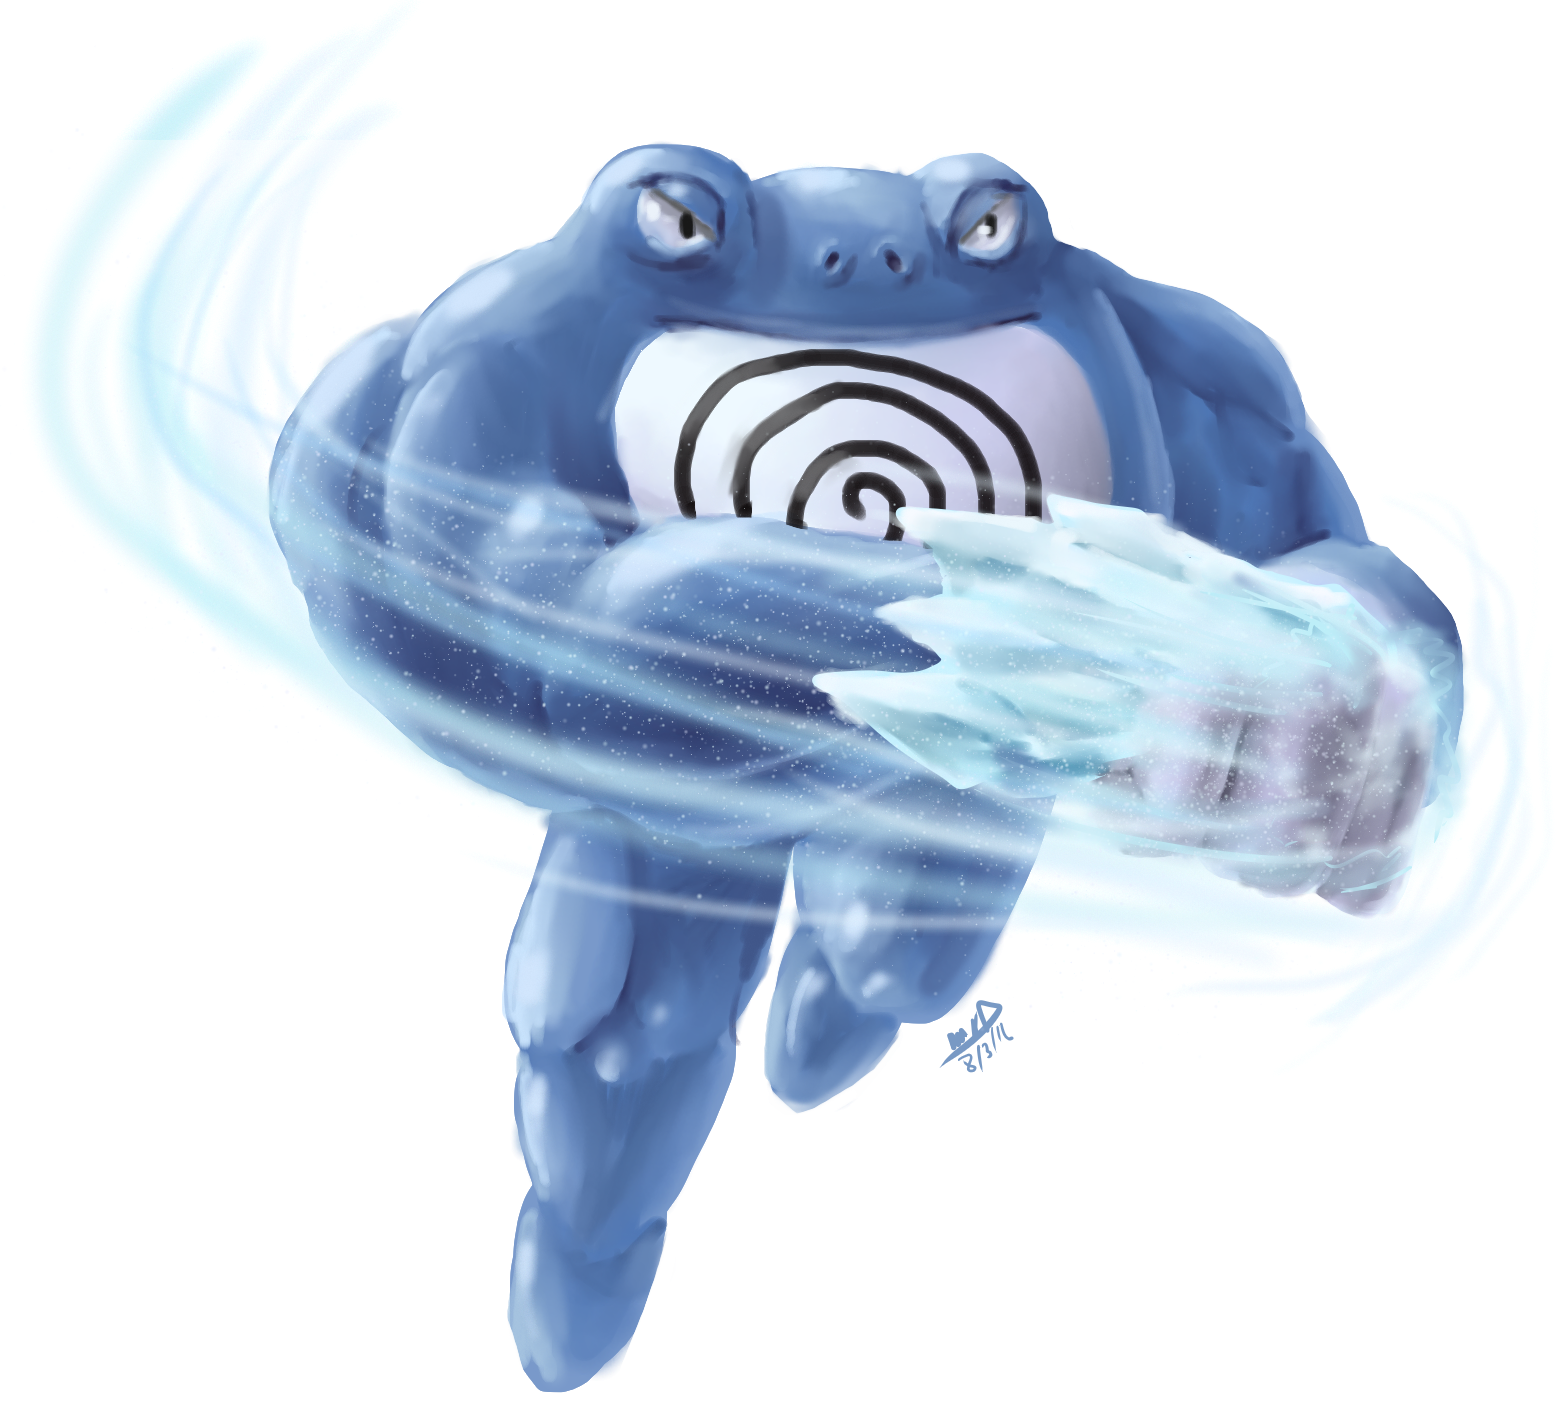 poliwrath-used-ice-punch-by-yggdrassal